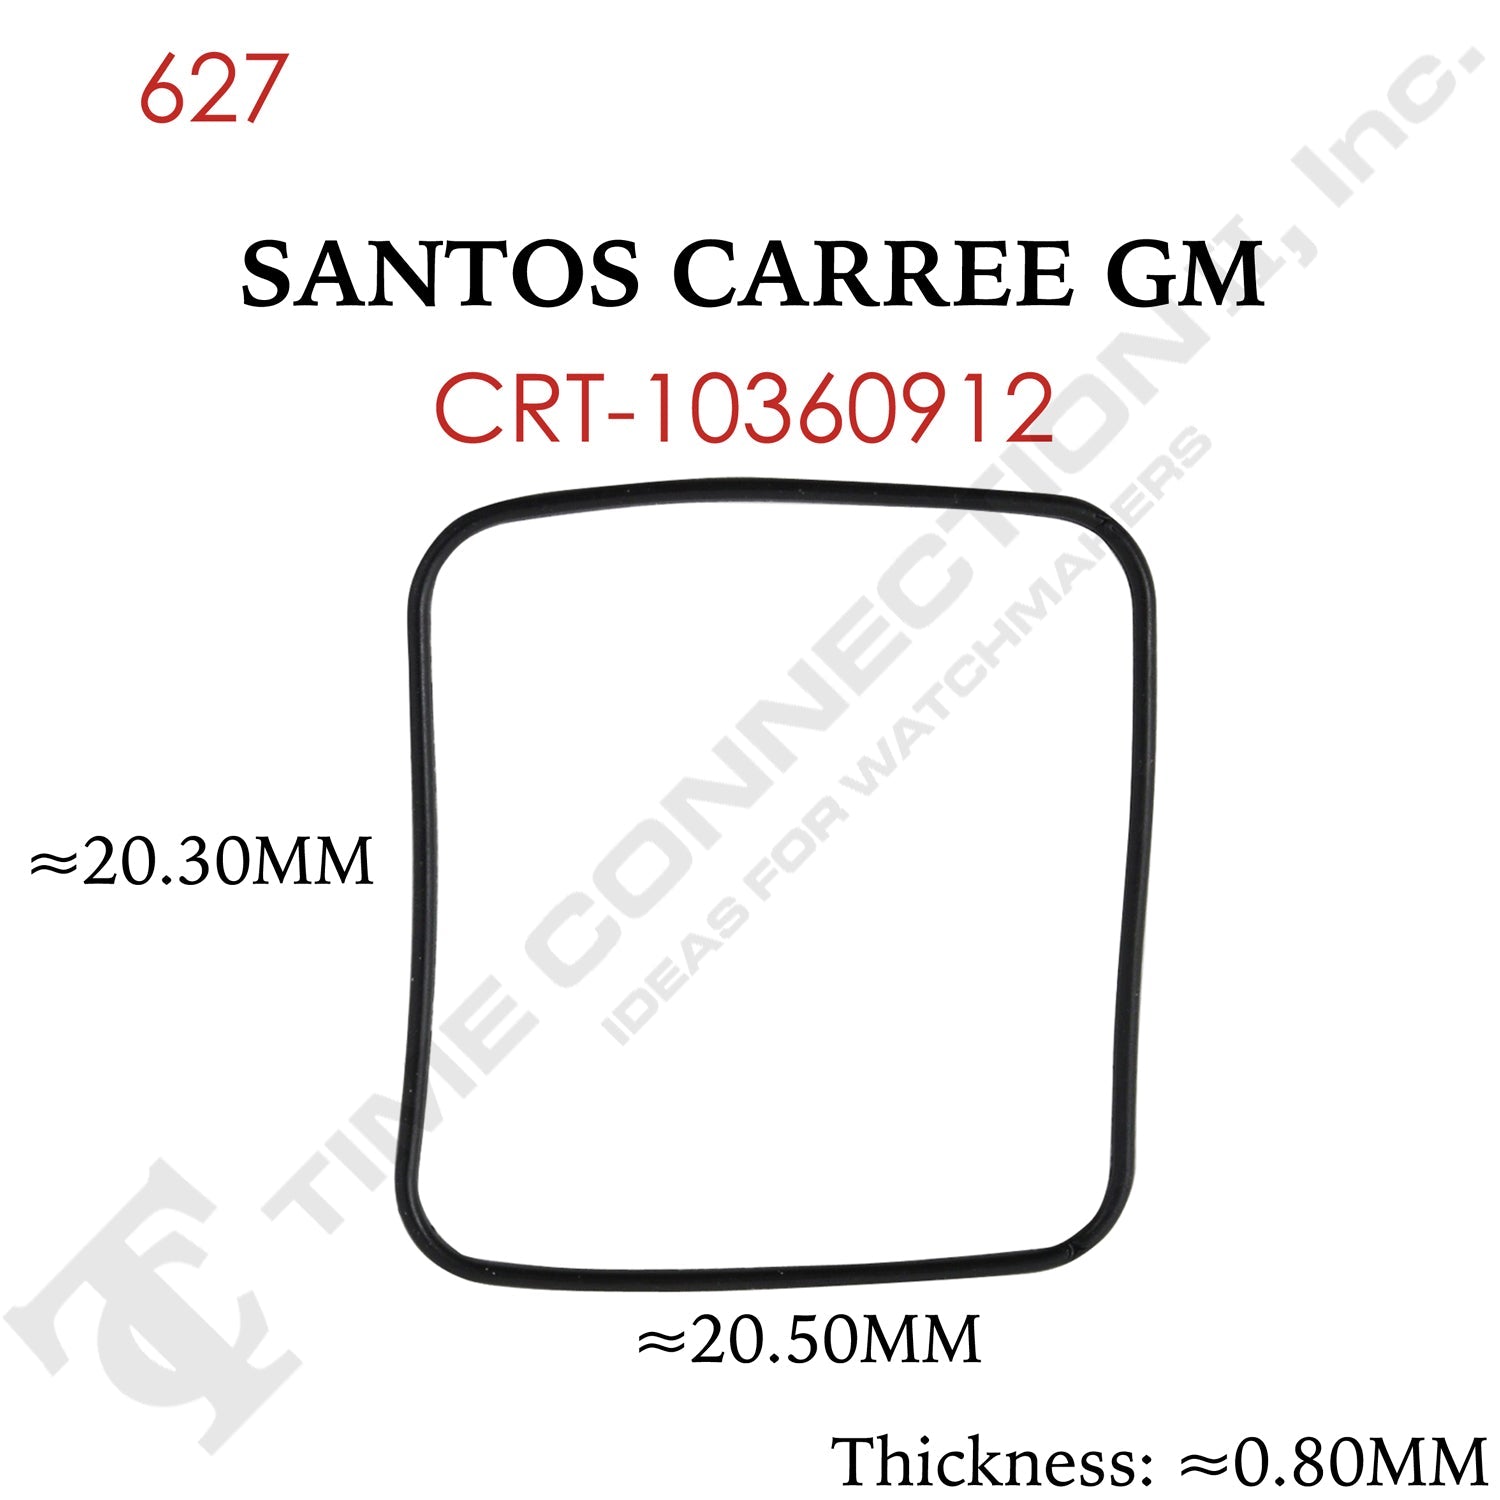 Original Cartier Square Case Back / Crystal Gaskets for Cartier Watches